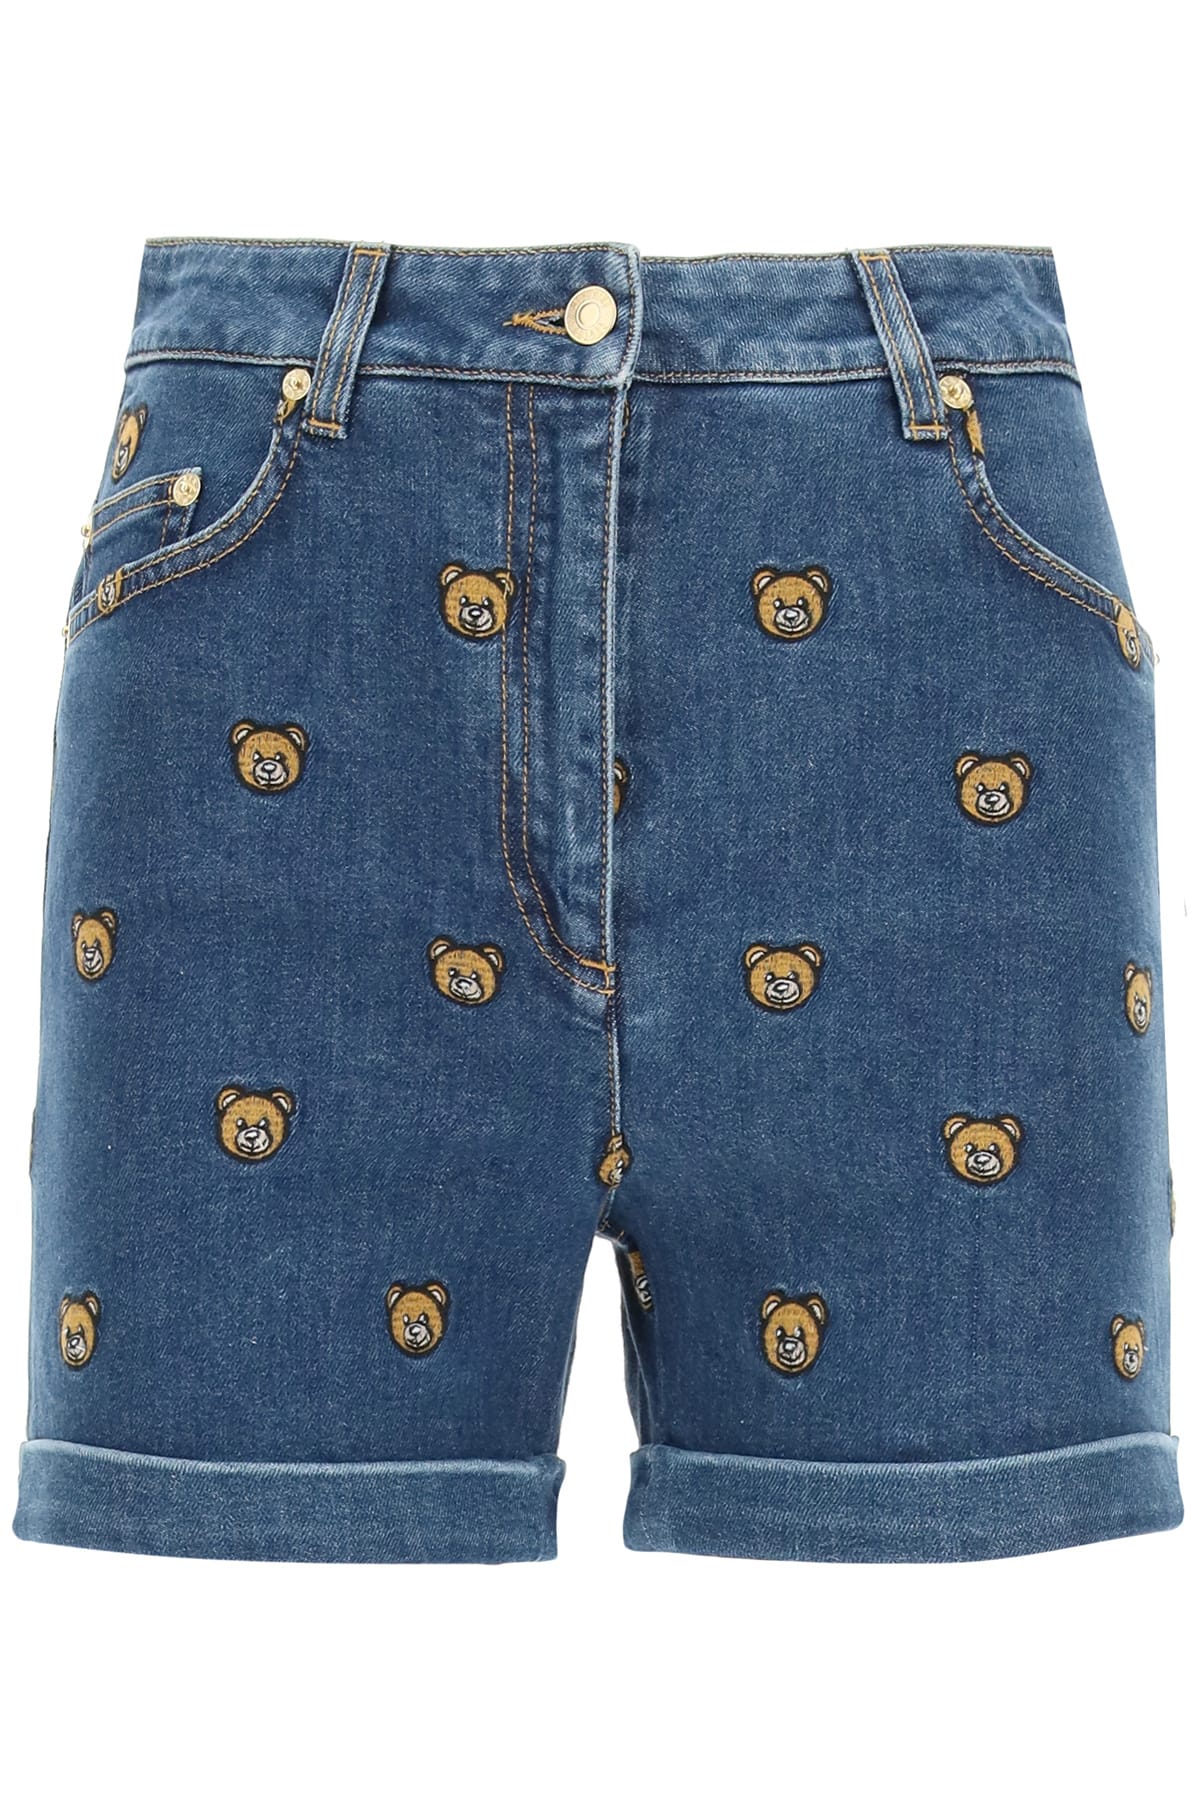 Moschino Denim Shorts With Embroidered Teddy Bear